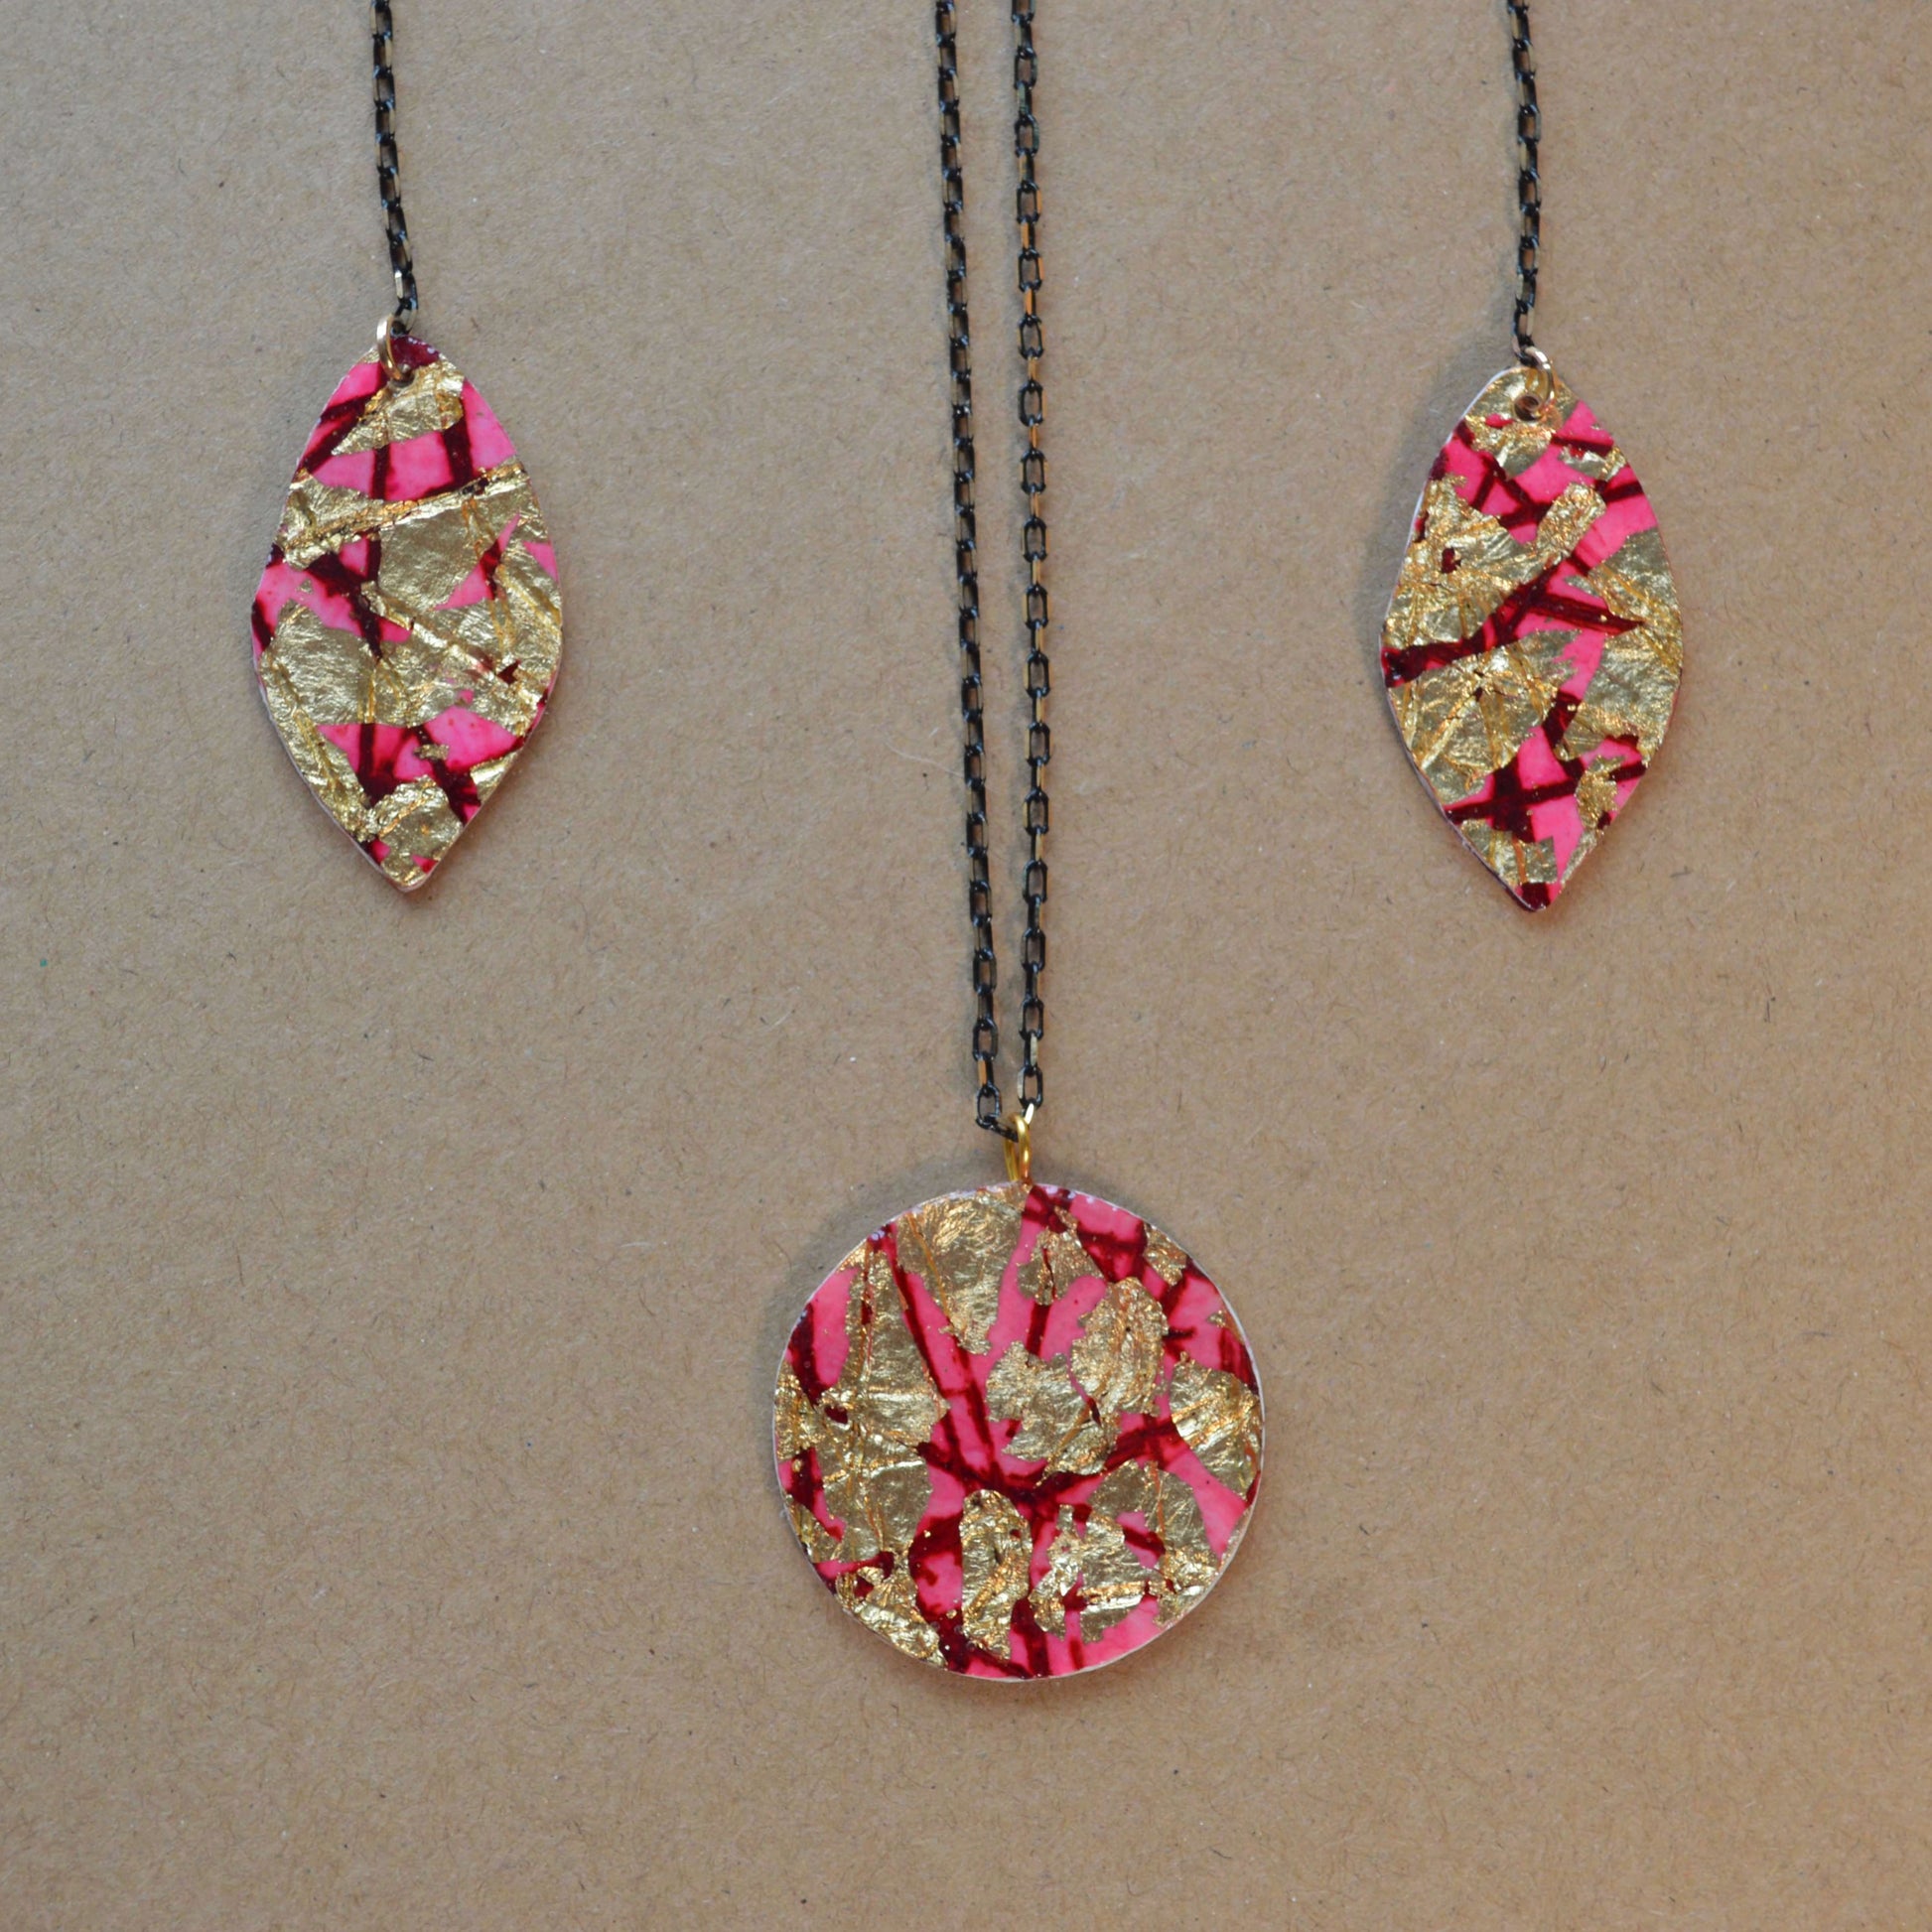 Matching Pink & Gold Earrings & Pendant - Drumgreenagh Gifts